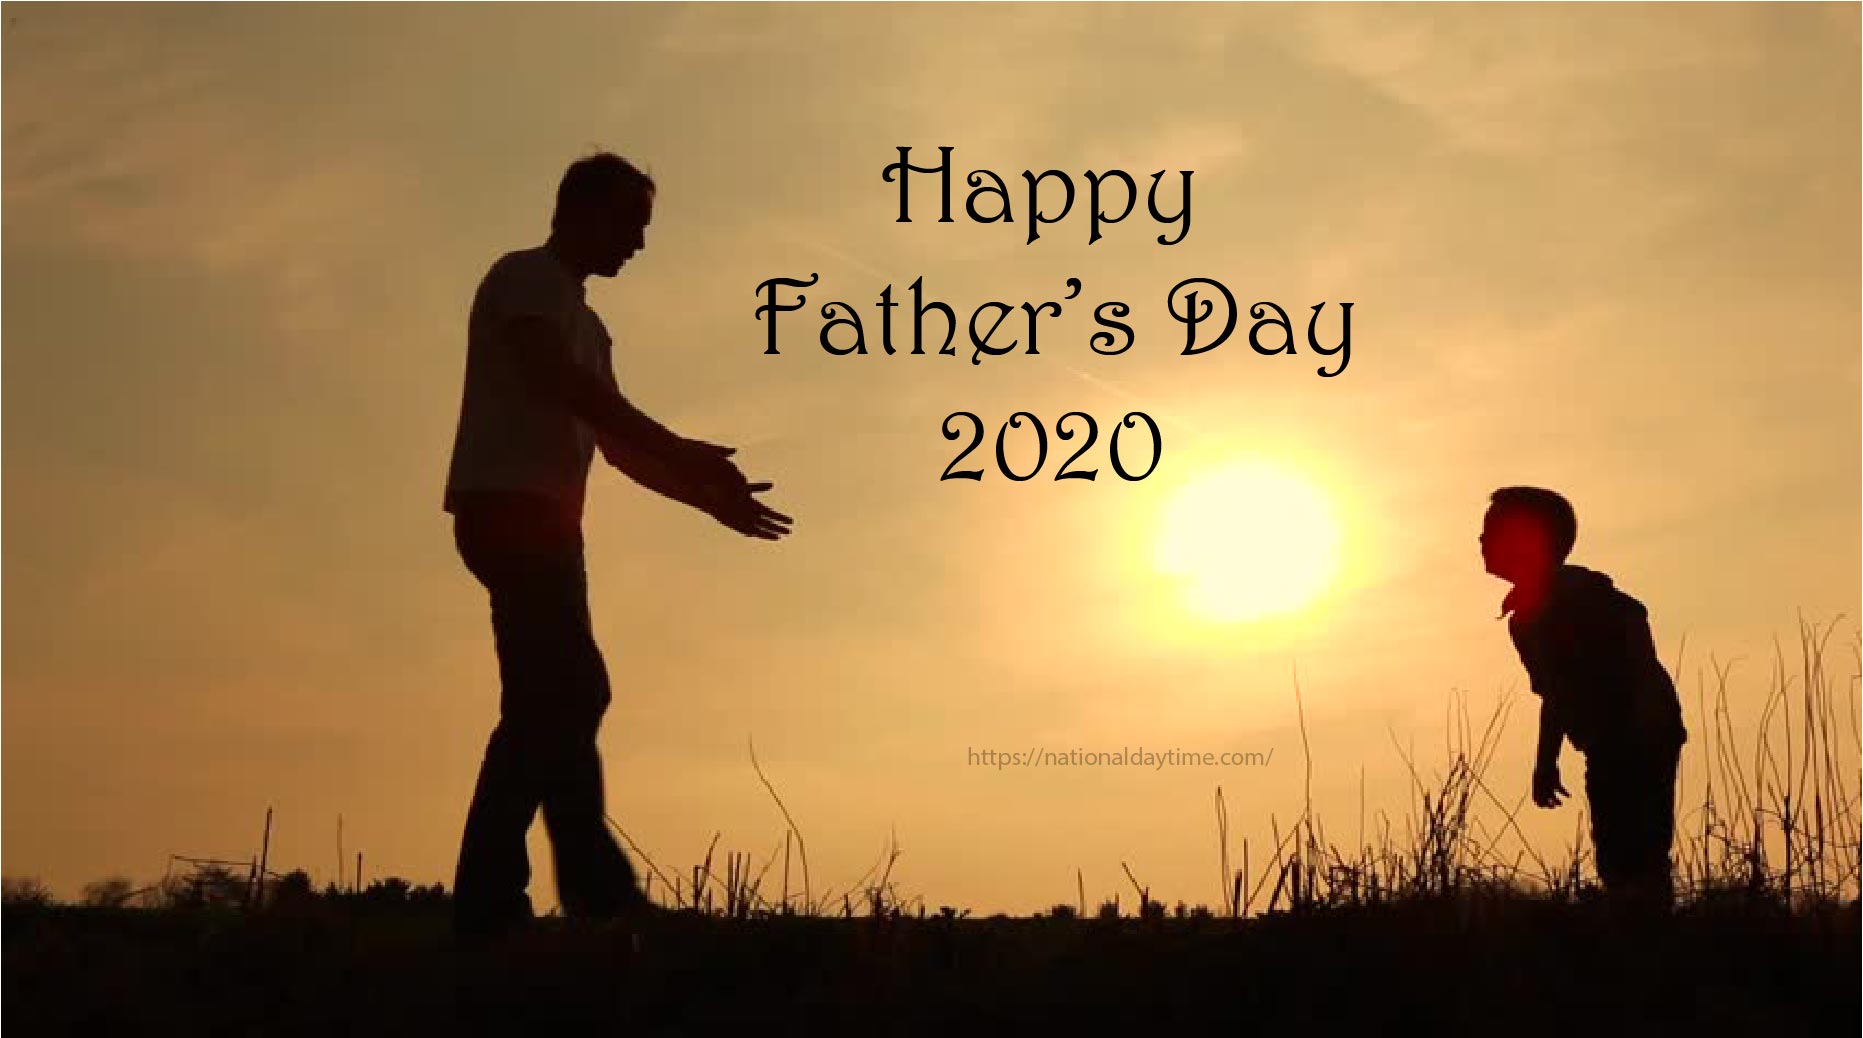 Father’s Day 2020